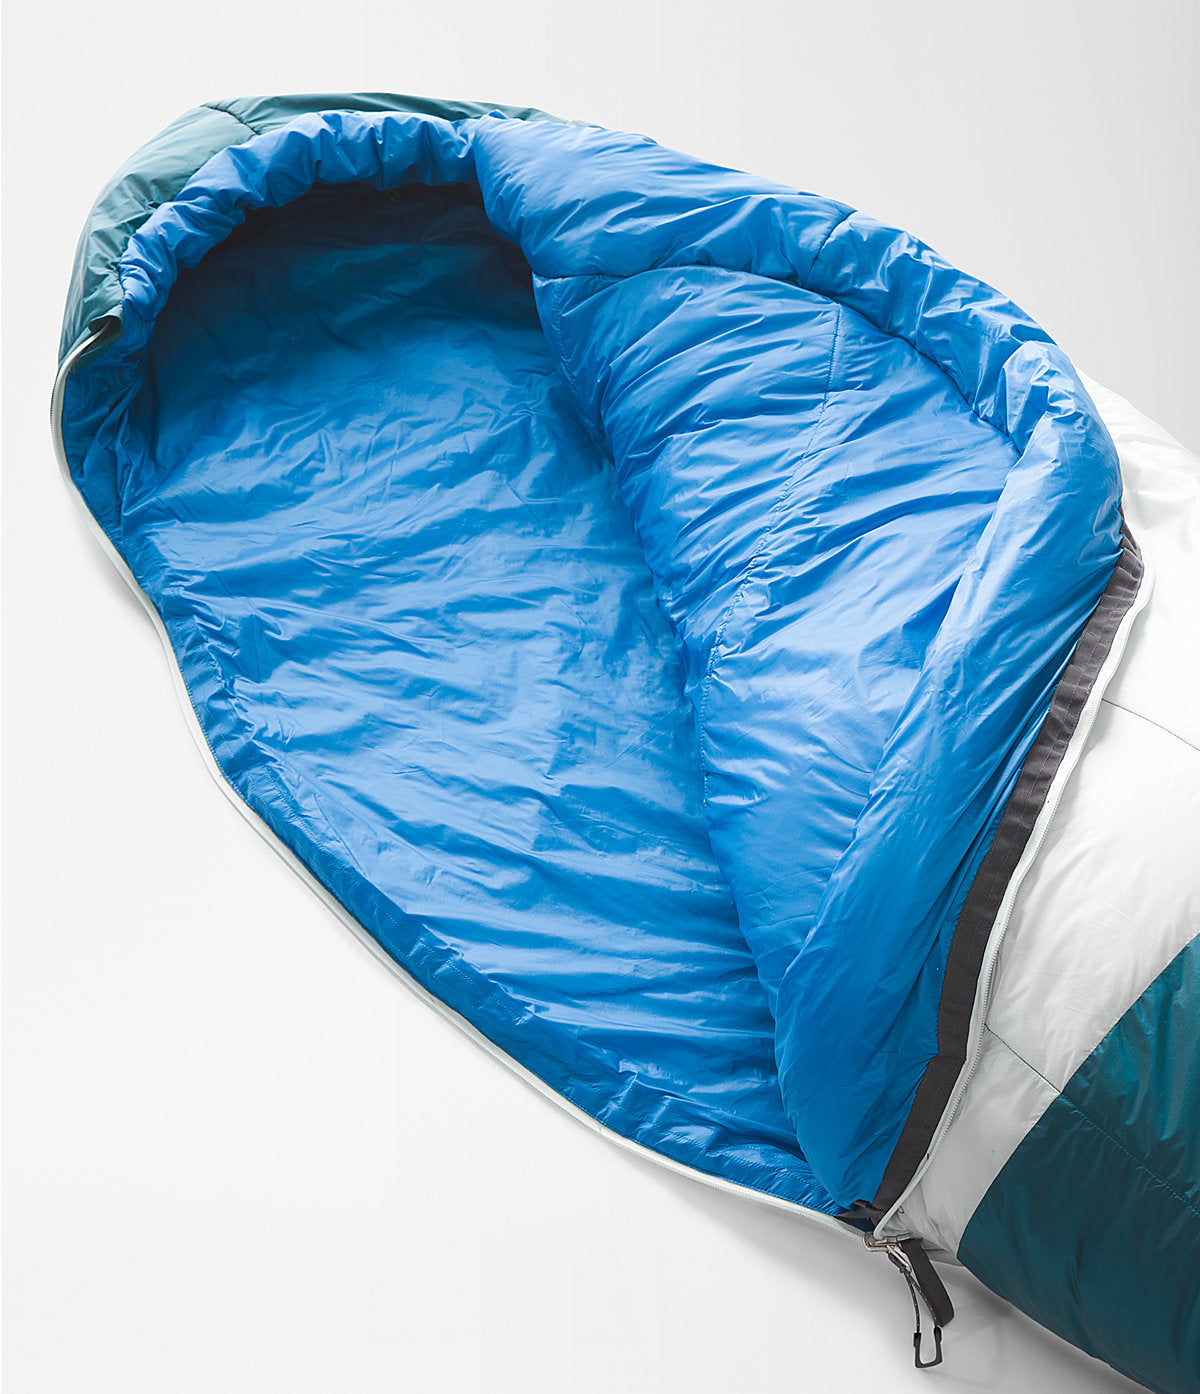 The North Face Cat’s Meow Sleeping Bag